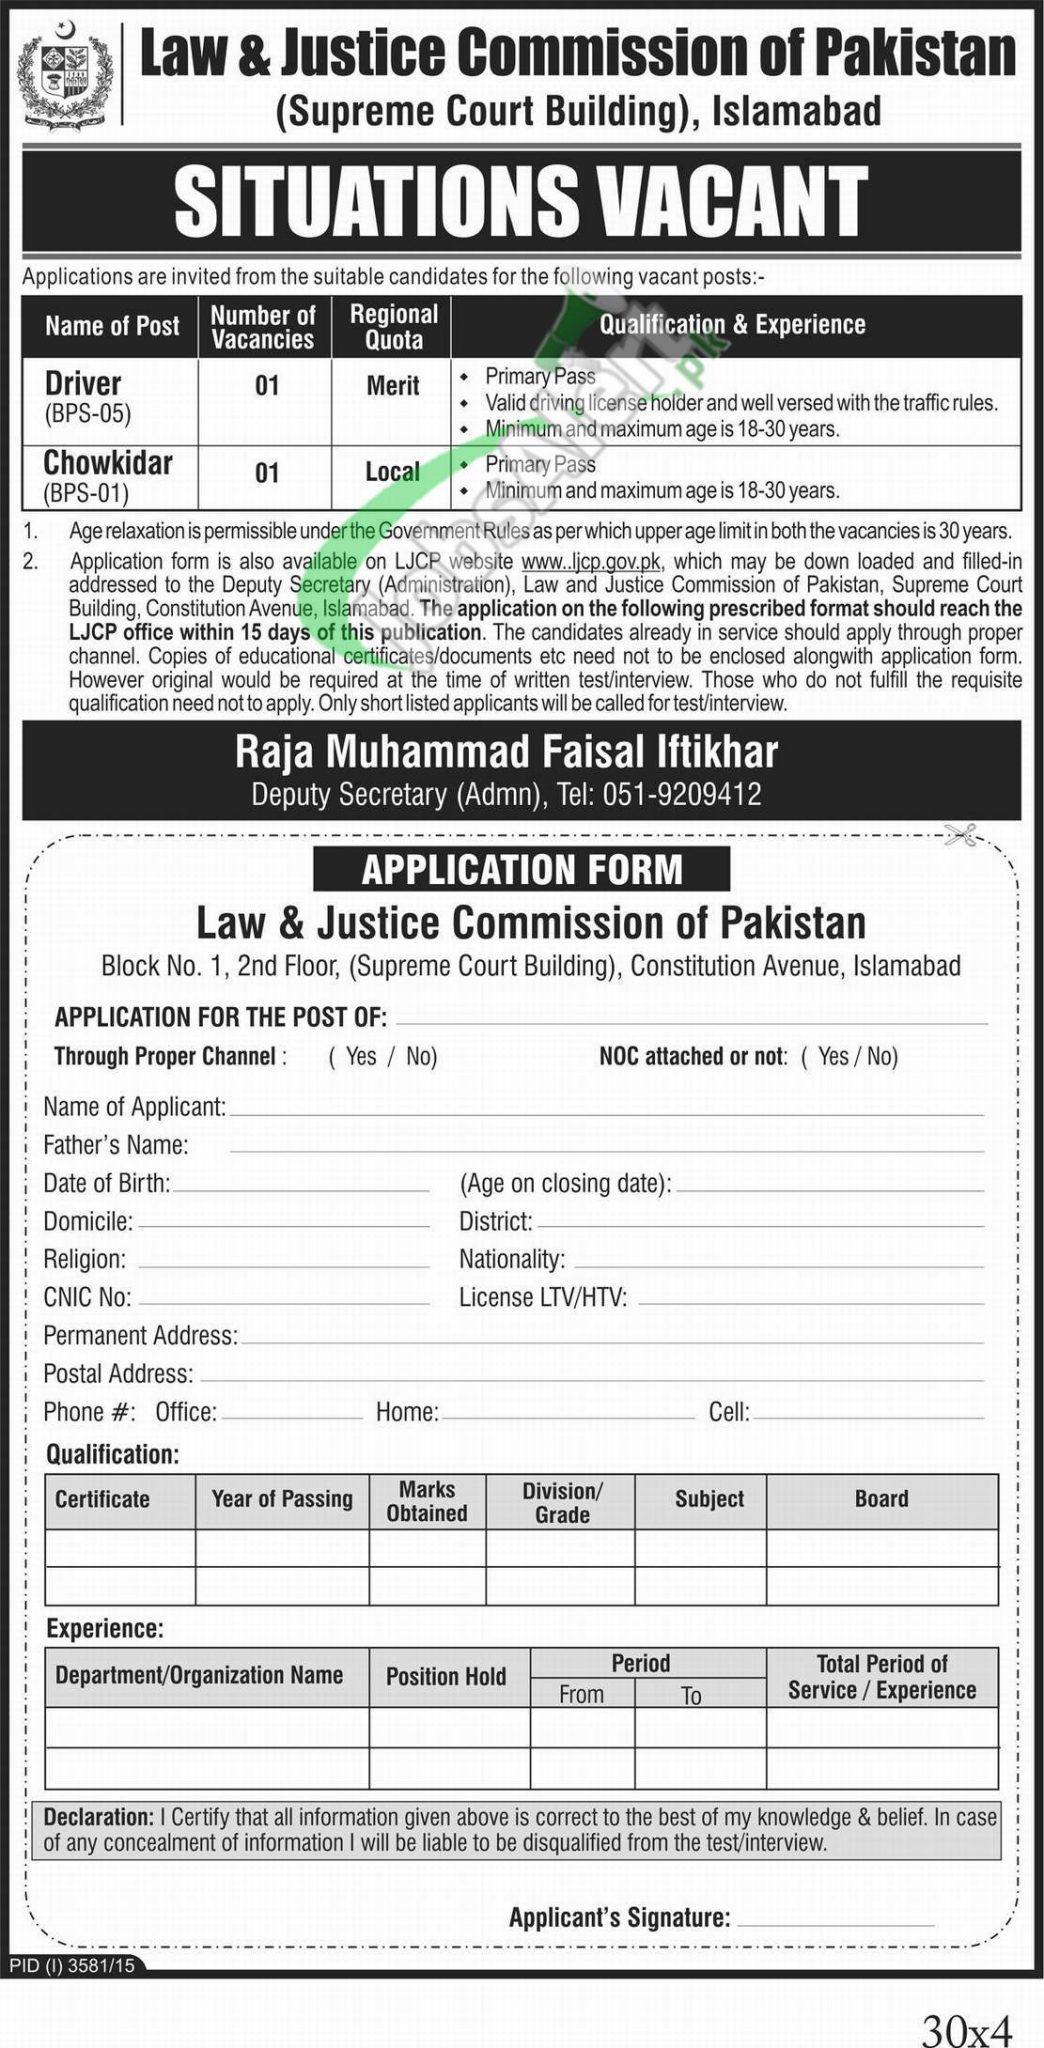 Law & Justice Commission of Pakistan Islamabad Jobs